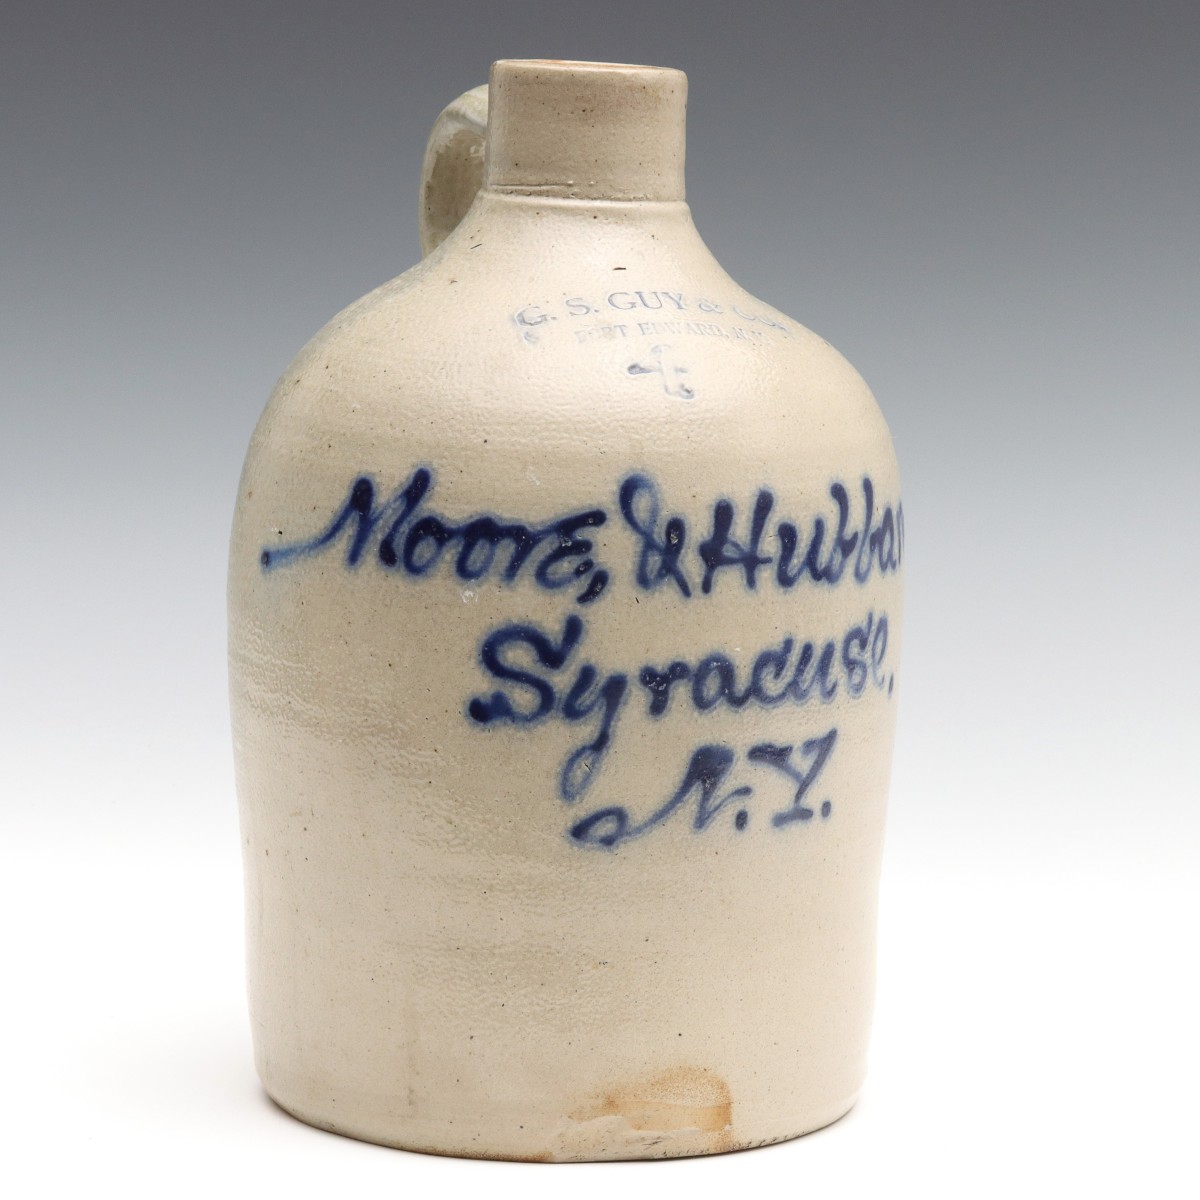 A BLUE DECORATED MERCHANT'S JUG FOR MOORE & HUBBARD